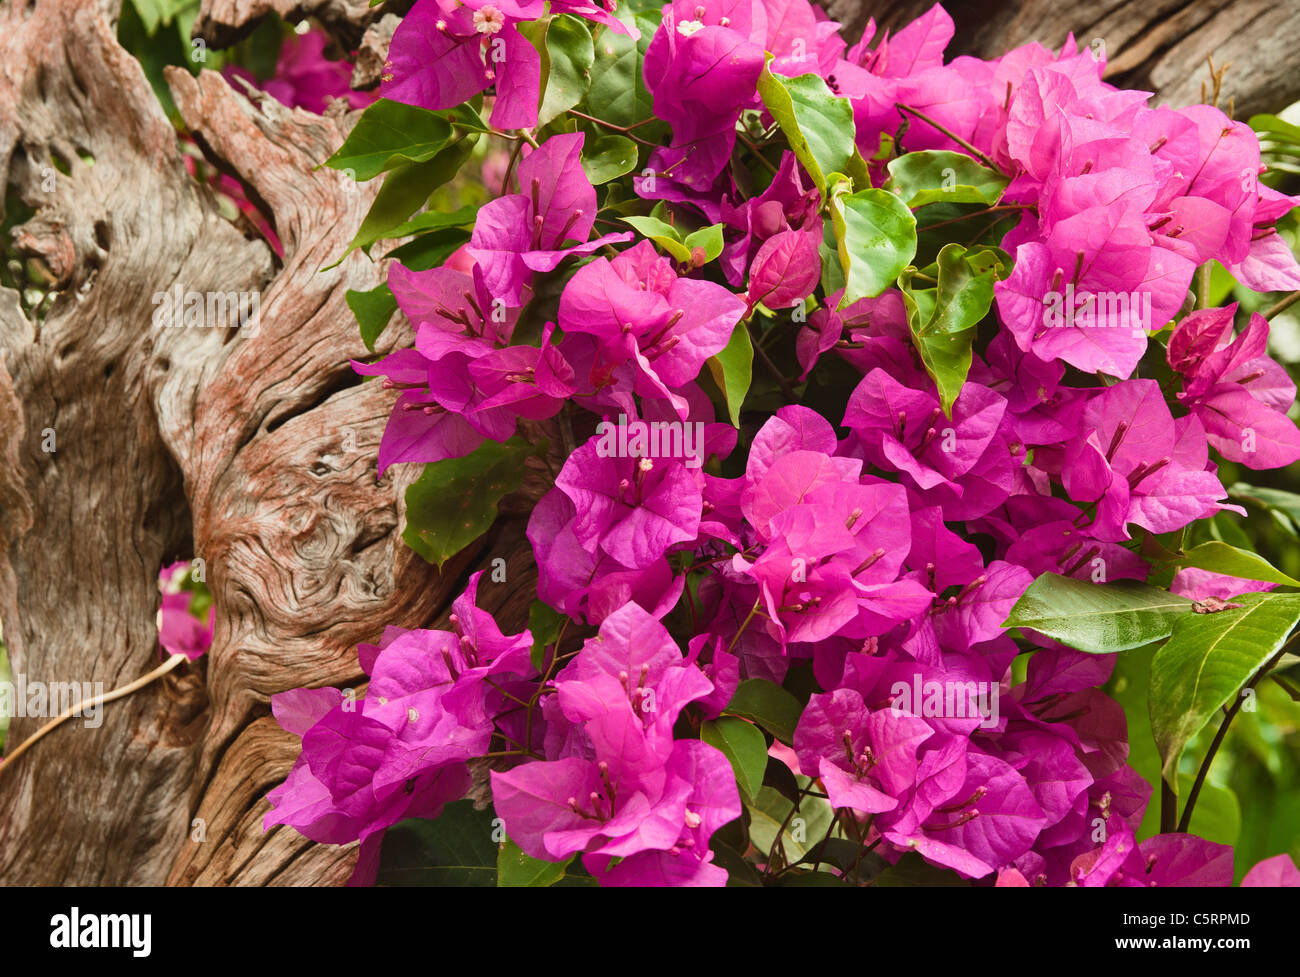 beautiful spray of pink flowers in the garden Stock Photo